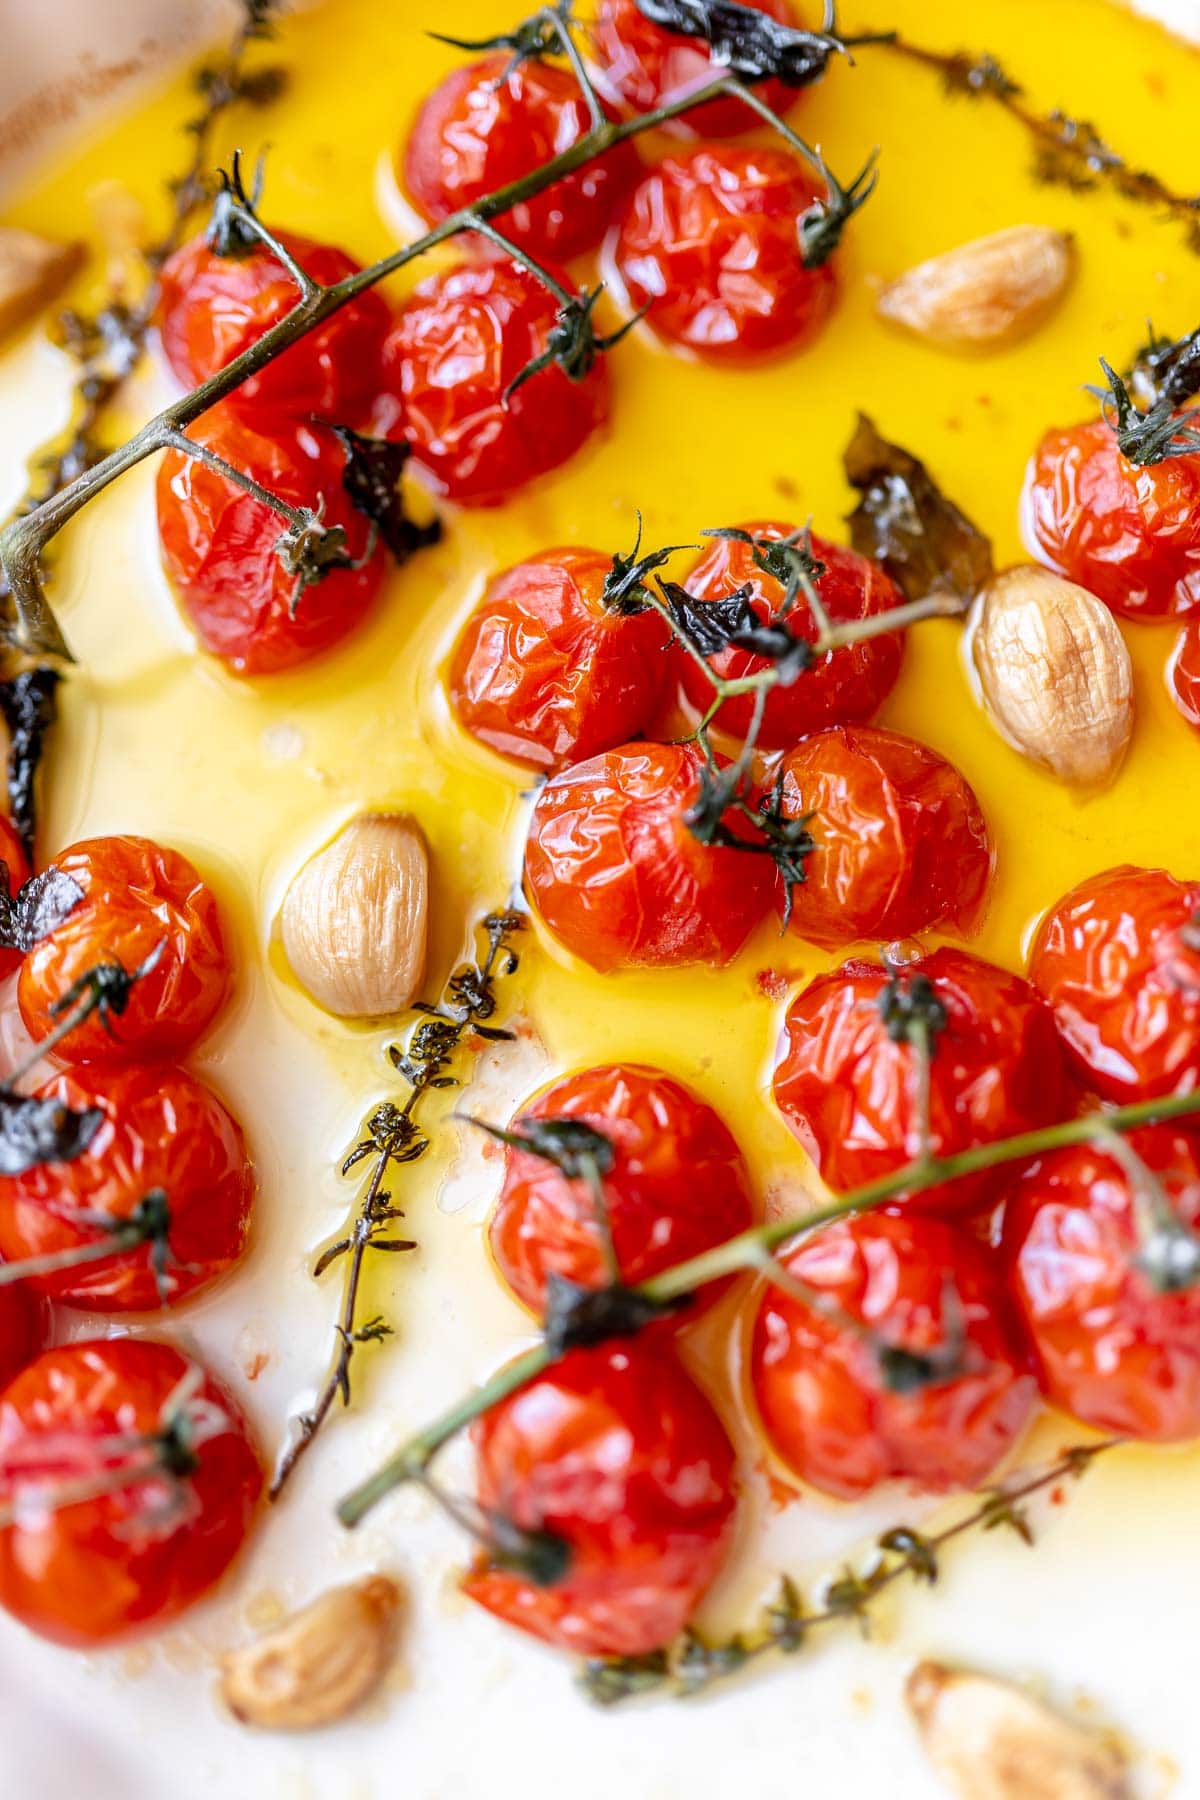 Soft, squishy red tomatoes on the vine resting in a dish filled with olive oil and golden garlic cloves.